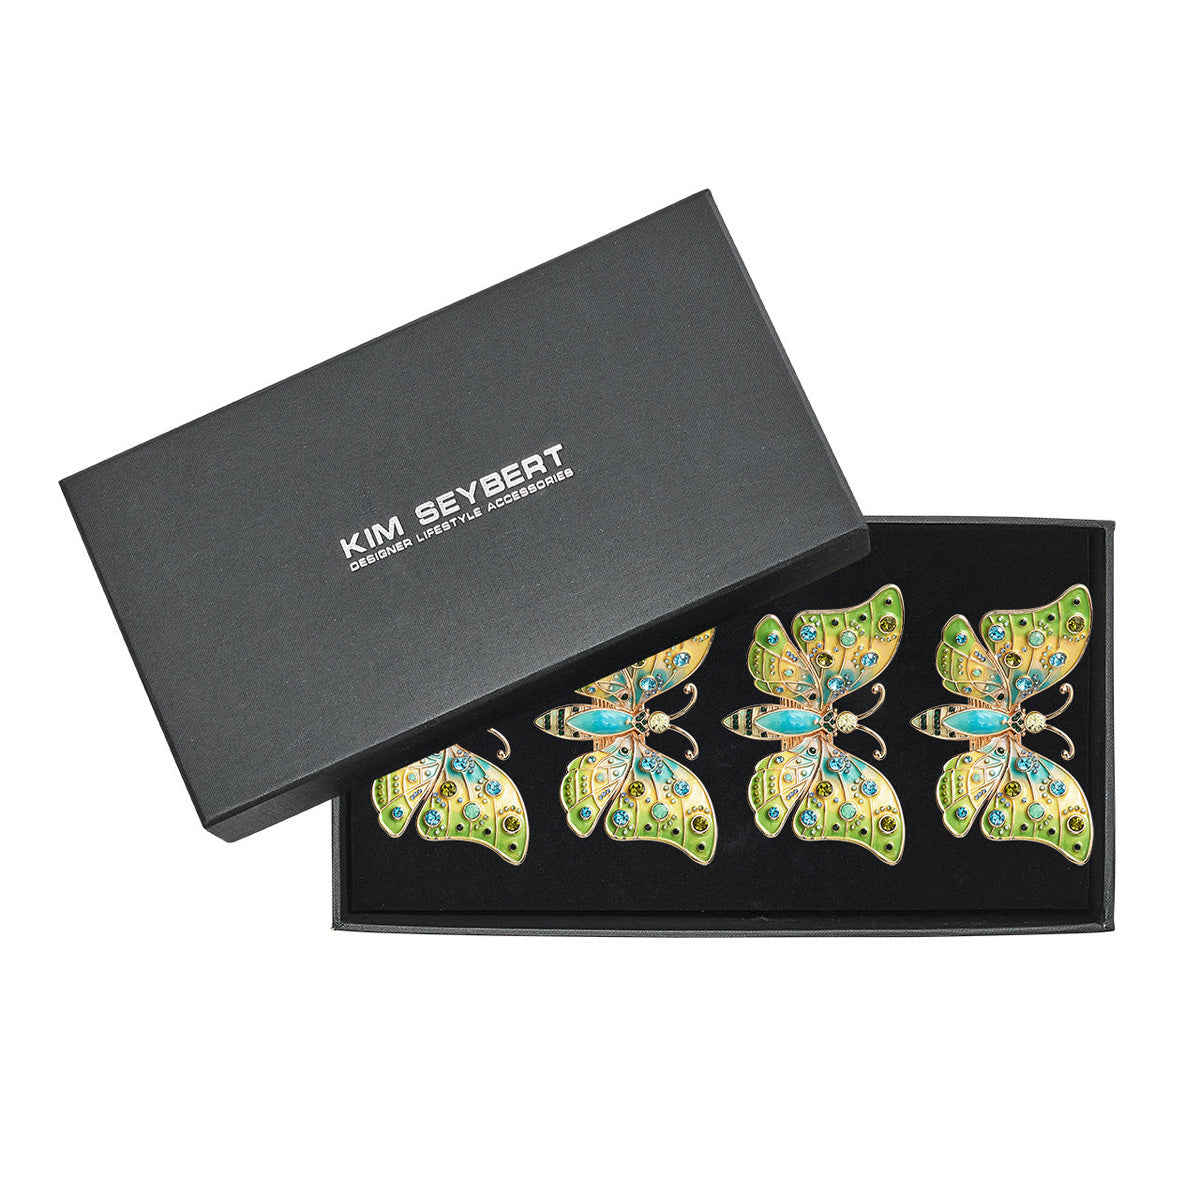 Arbor Napkin Ring in Blue & Green - Set of 4 in a Gift Box by Kim Seybert Additional Image-6